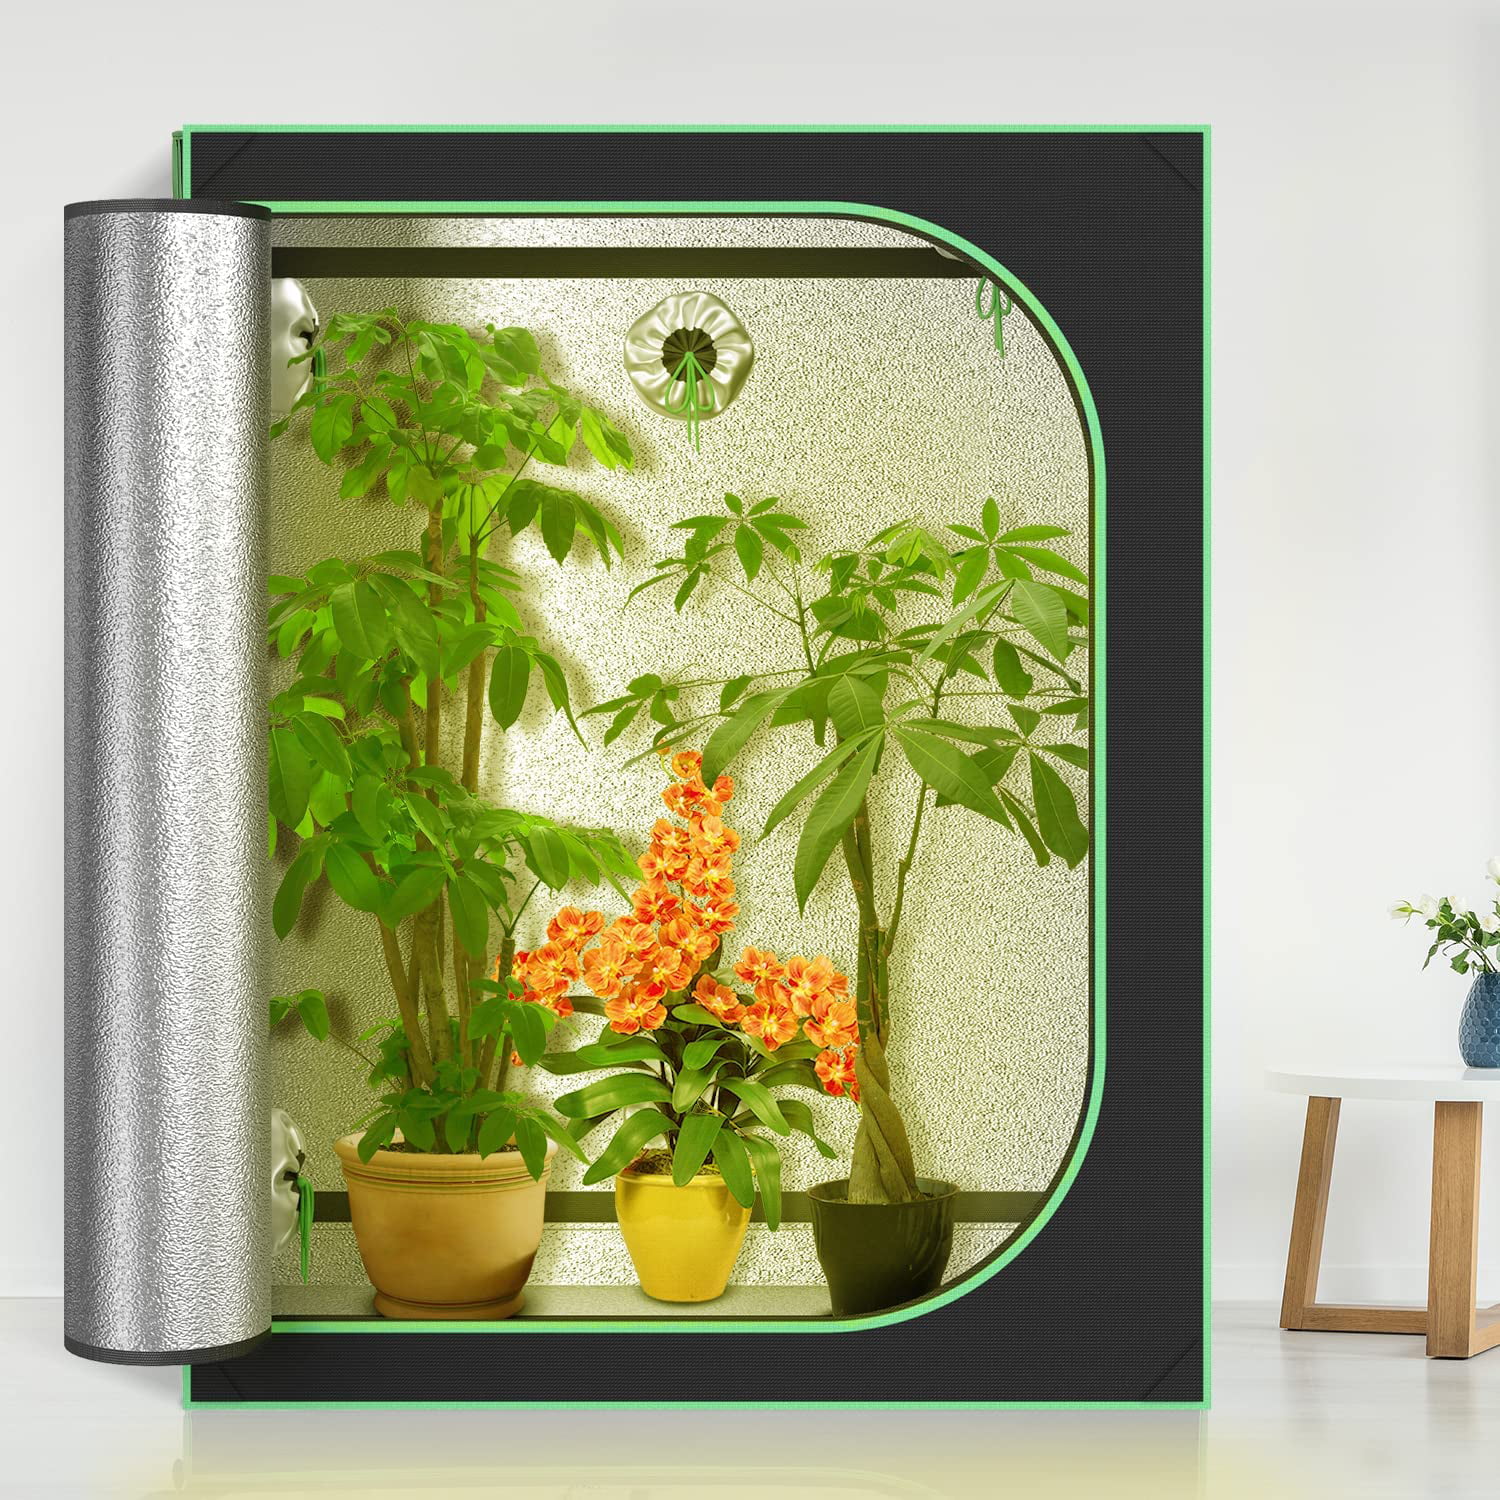 2x2 Grow Tent S223, 1-2 Plants Use, High Reflective Mylar with Observation Window and Floor Tray for Hydroponics Indoor Plant 4′′ x 24′′ x 36′′